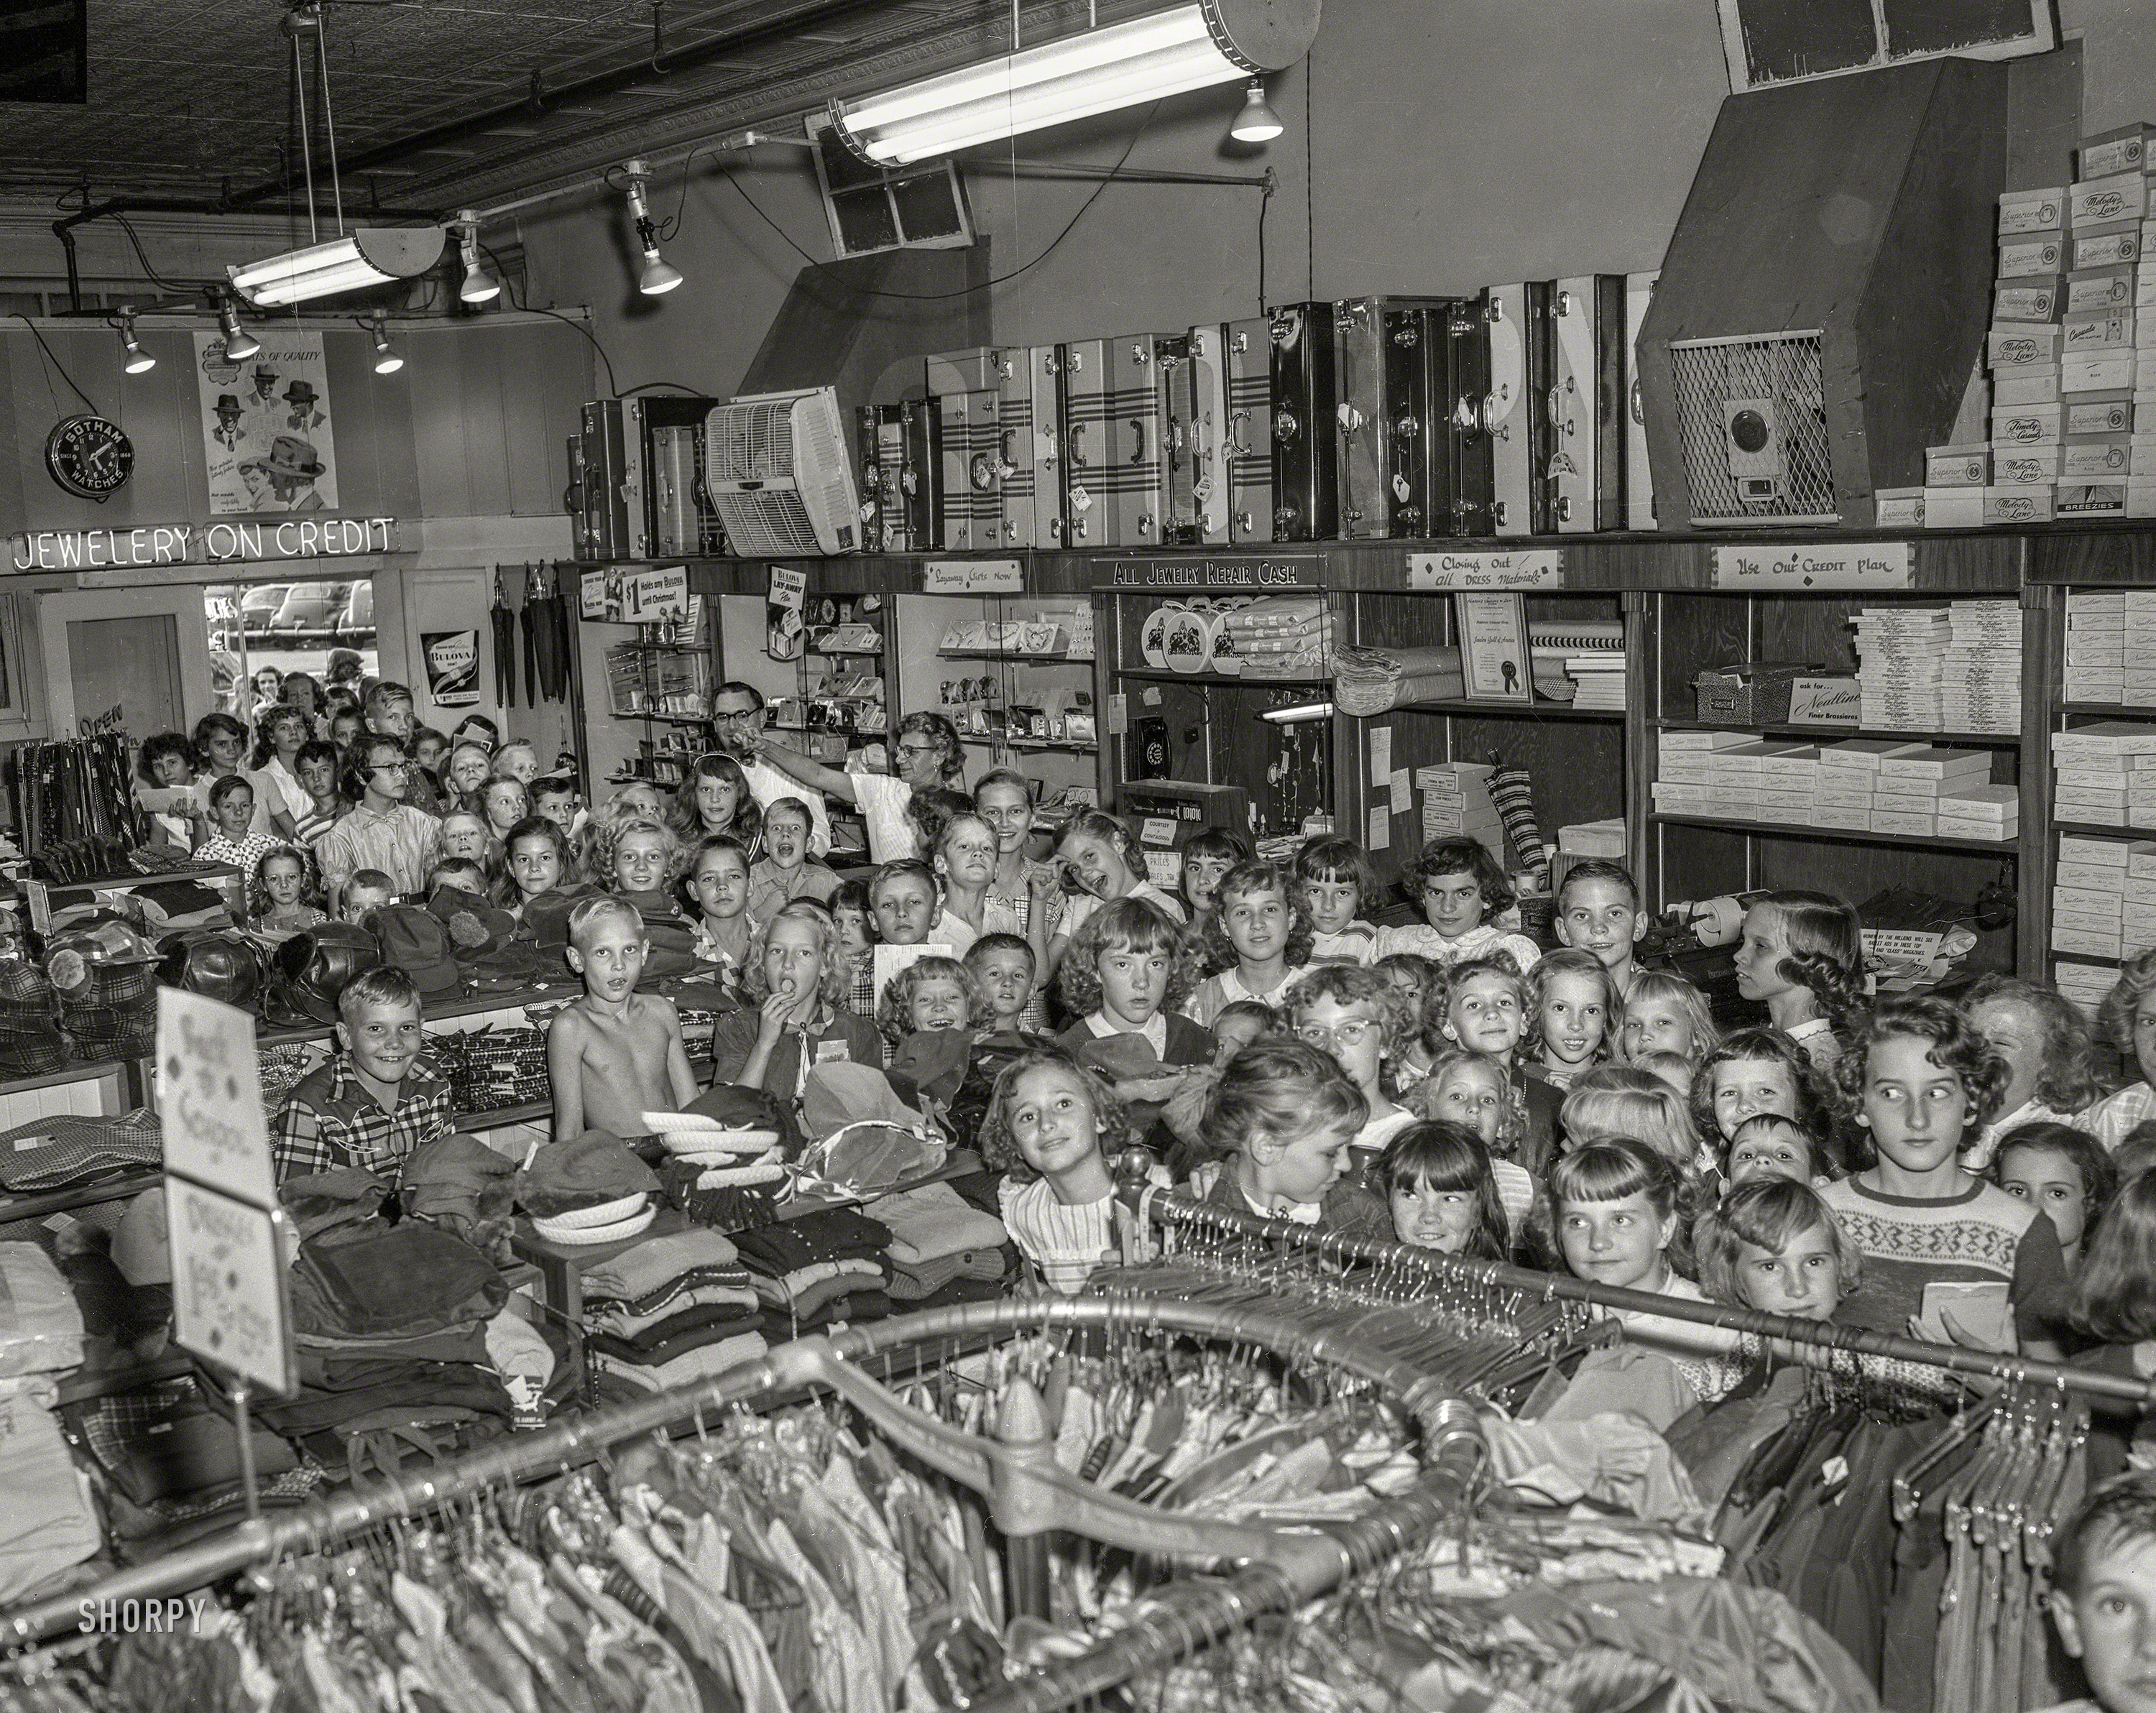 Palatine, Illinois, circa 1950. "Schoolchildren at Hirsch's." Home of the Neon Typo. 4x5 acetate negative from the Shorpy News Photo Archive. View full size.
